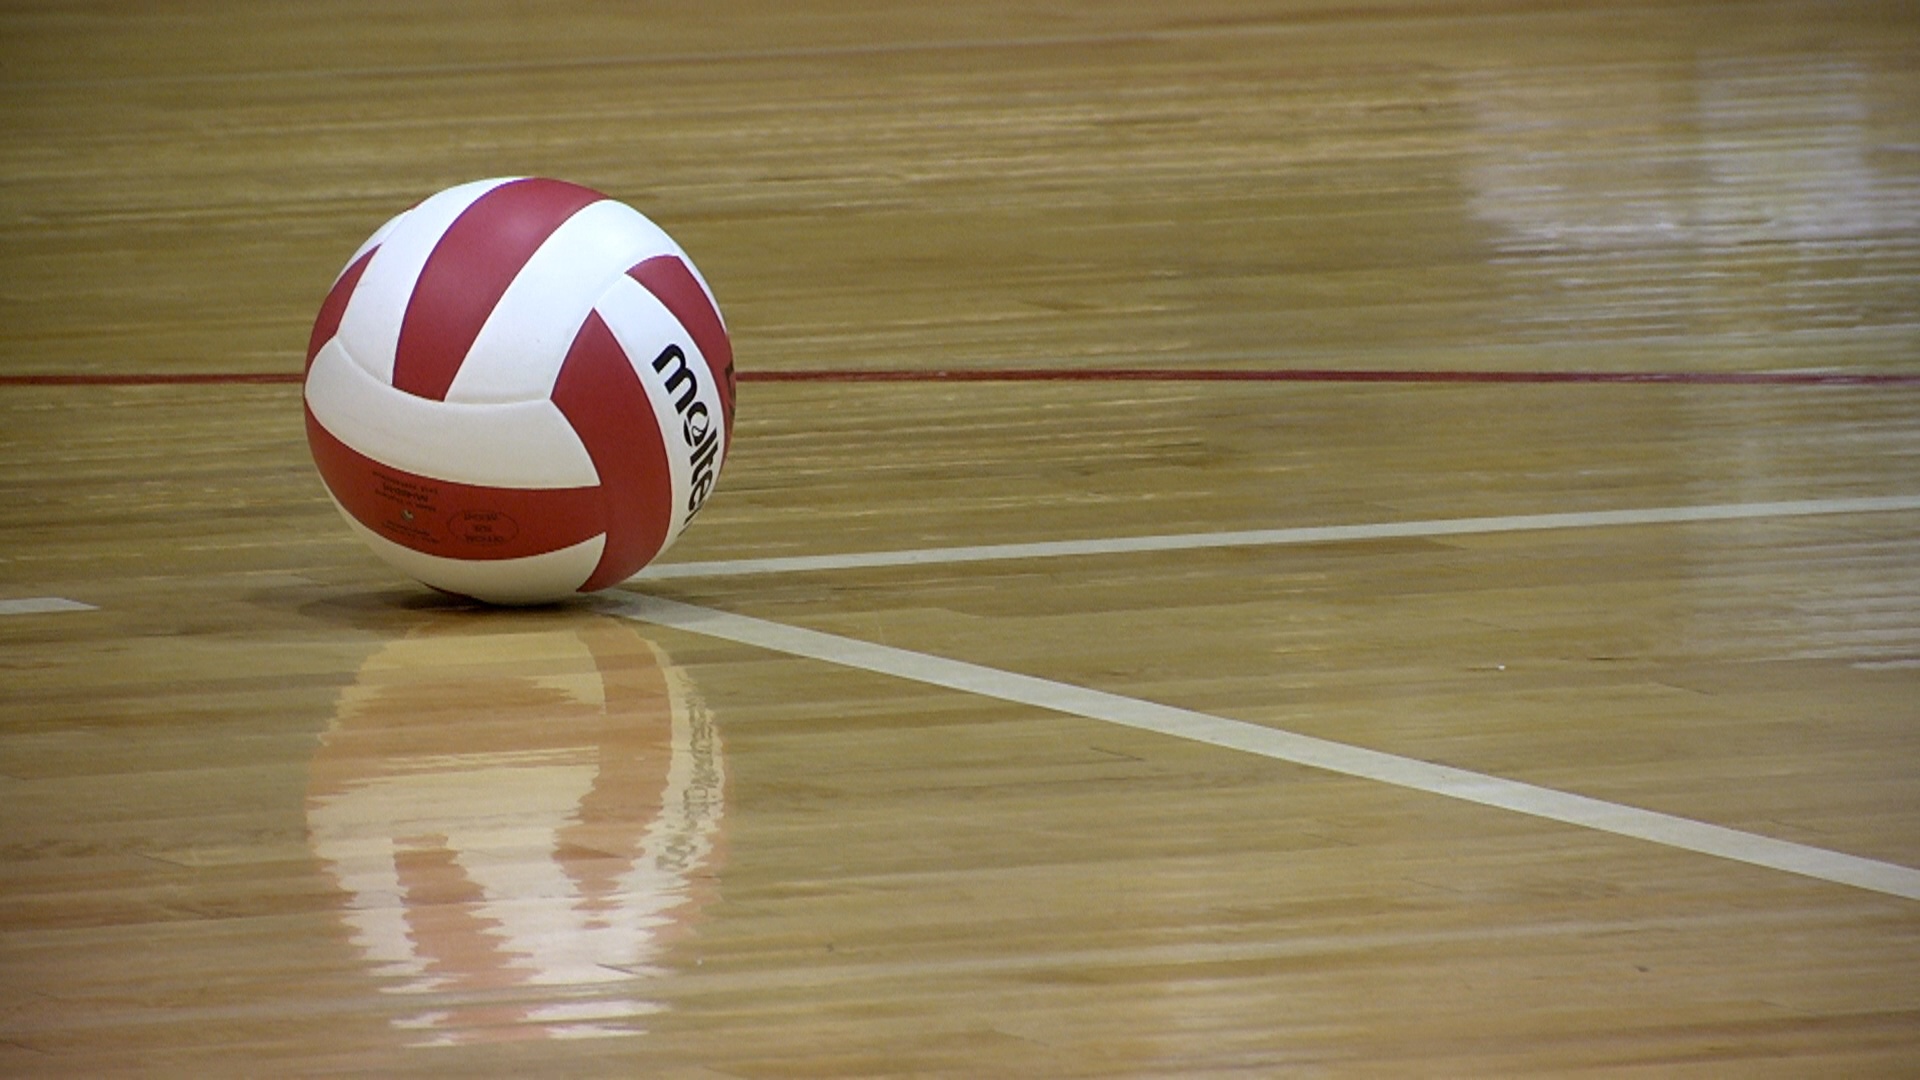 Volleyball Wallpaper Image Photos Pictures Background